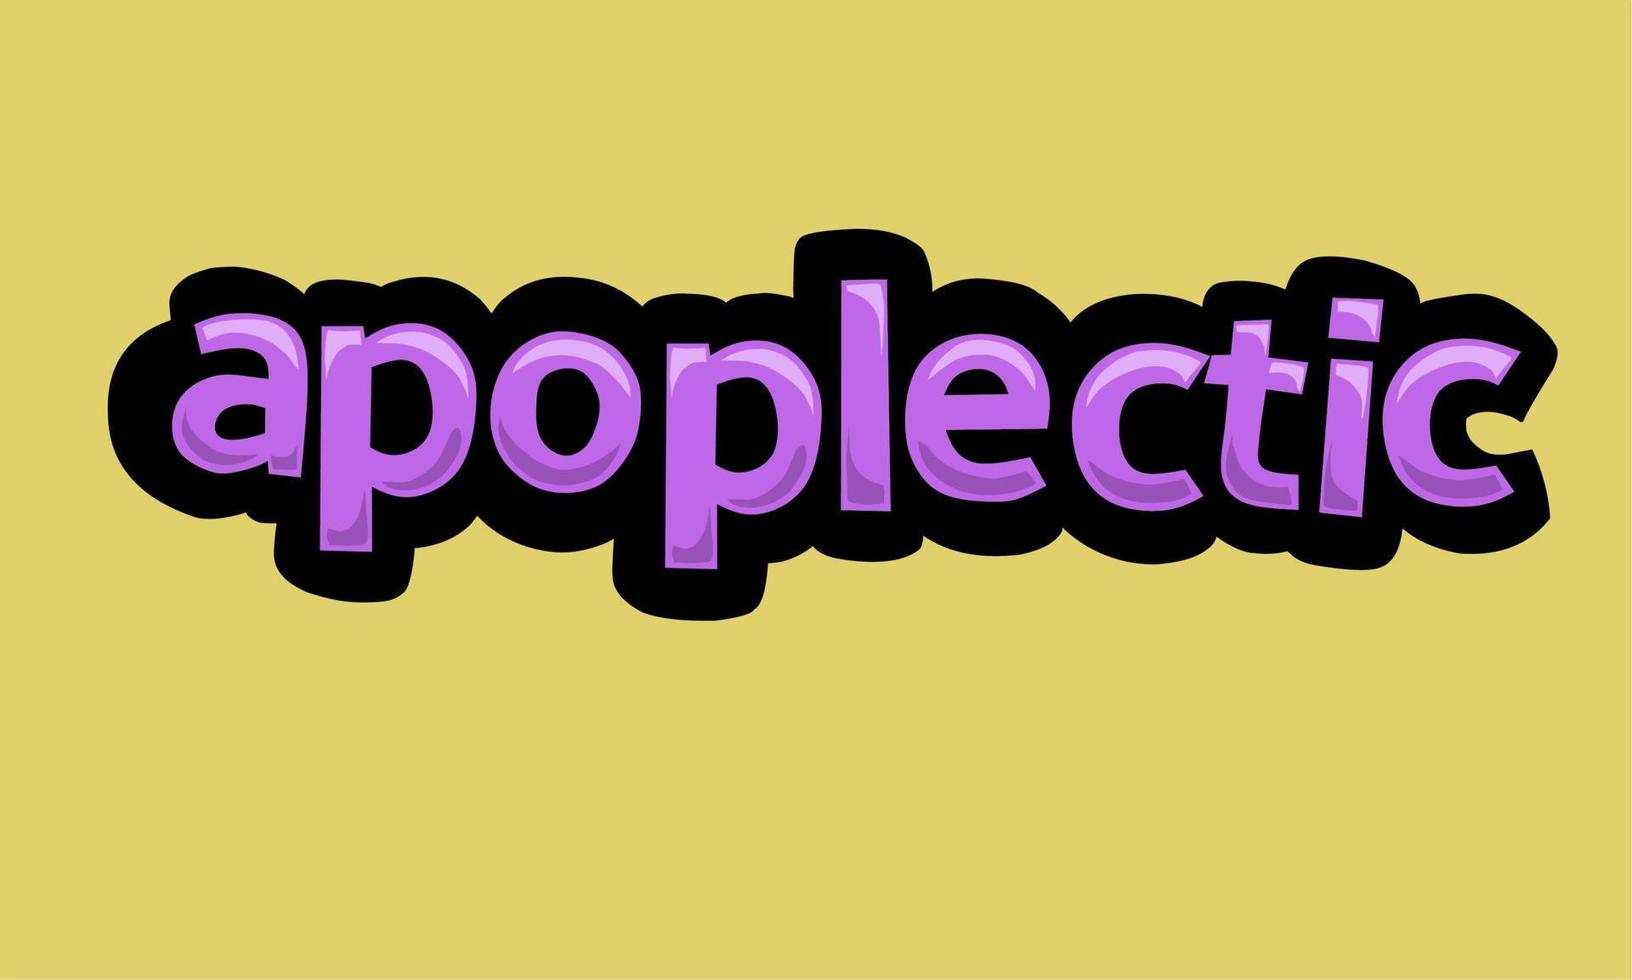 APOPLECTIC writing vector design on a yellow background